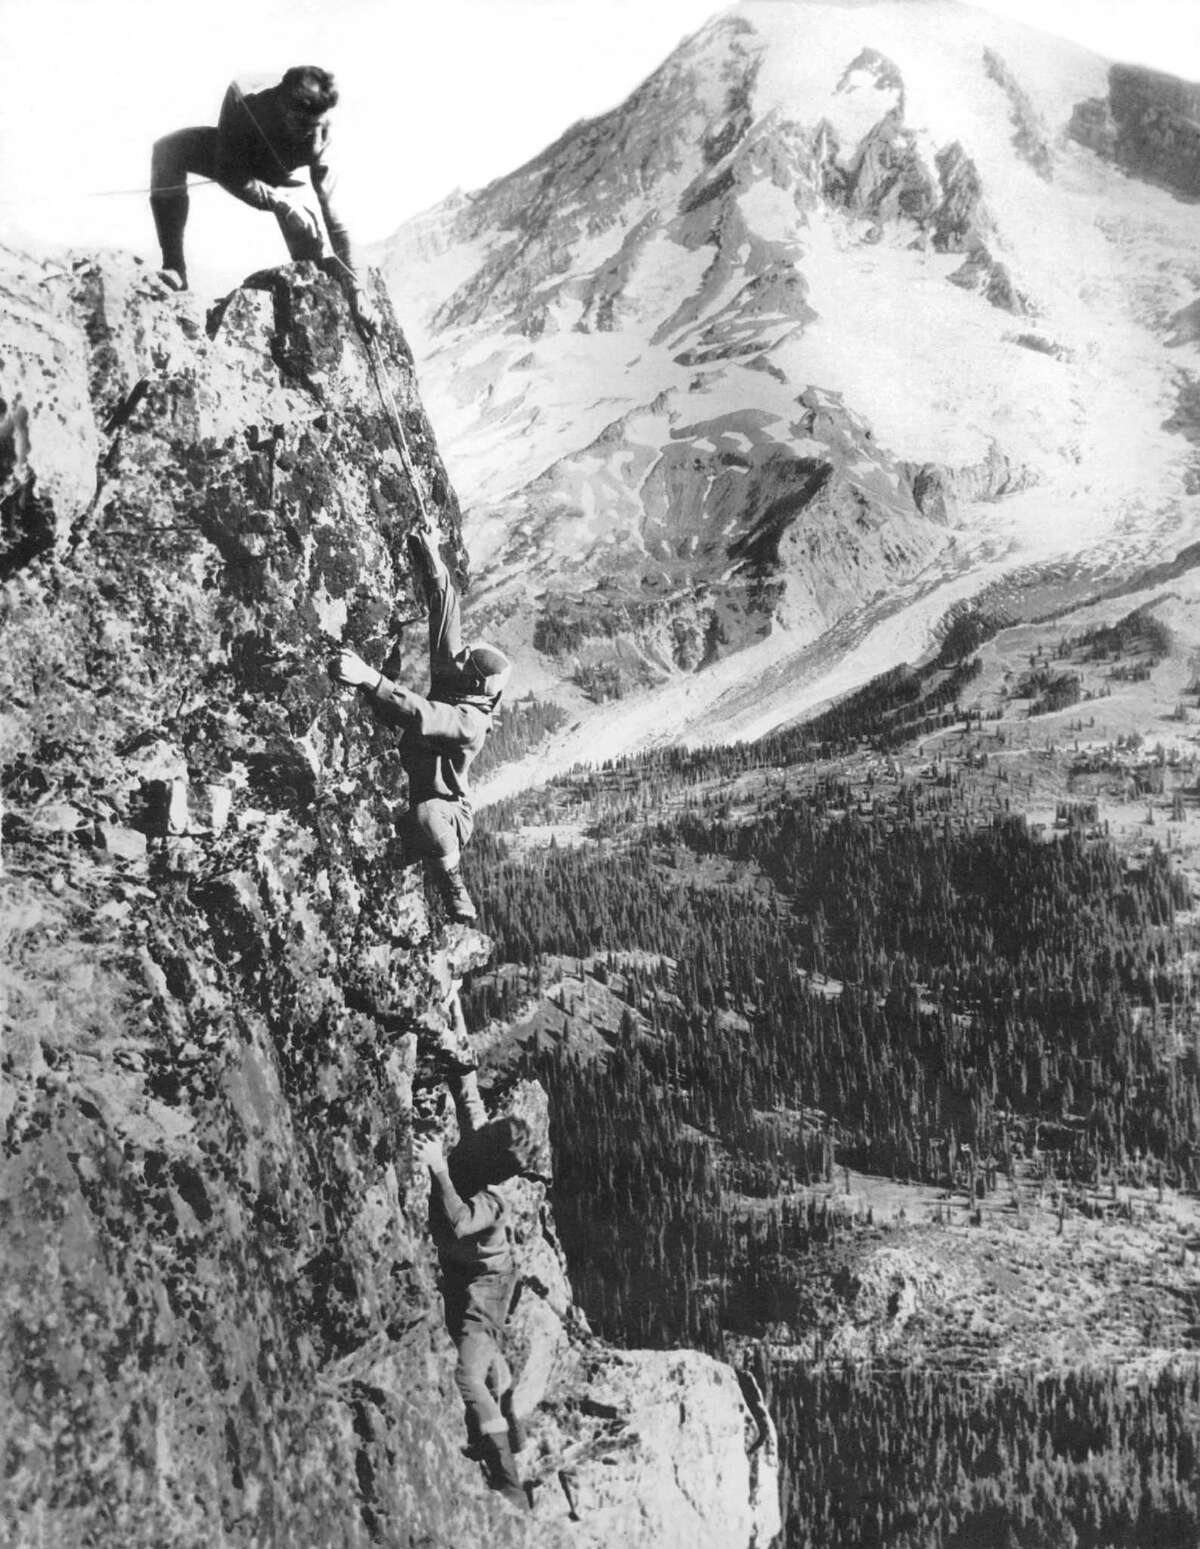 A party of three mountain climbers just as they are about to reach the top of Pinnacle Peak overlooking Paradise Valley, Mount Rainier National Park, Washington, August 15, 1925.